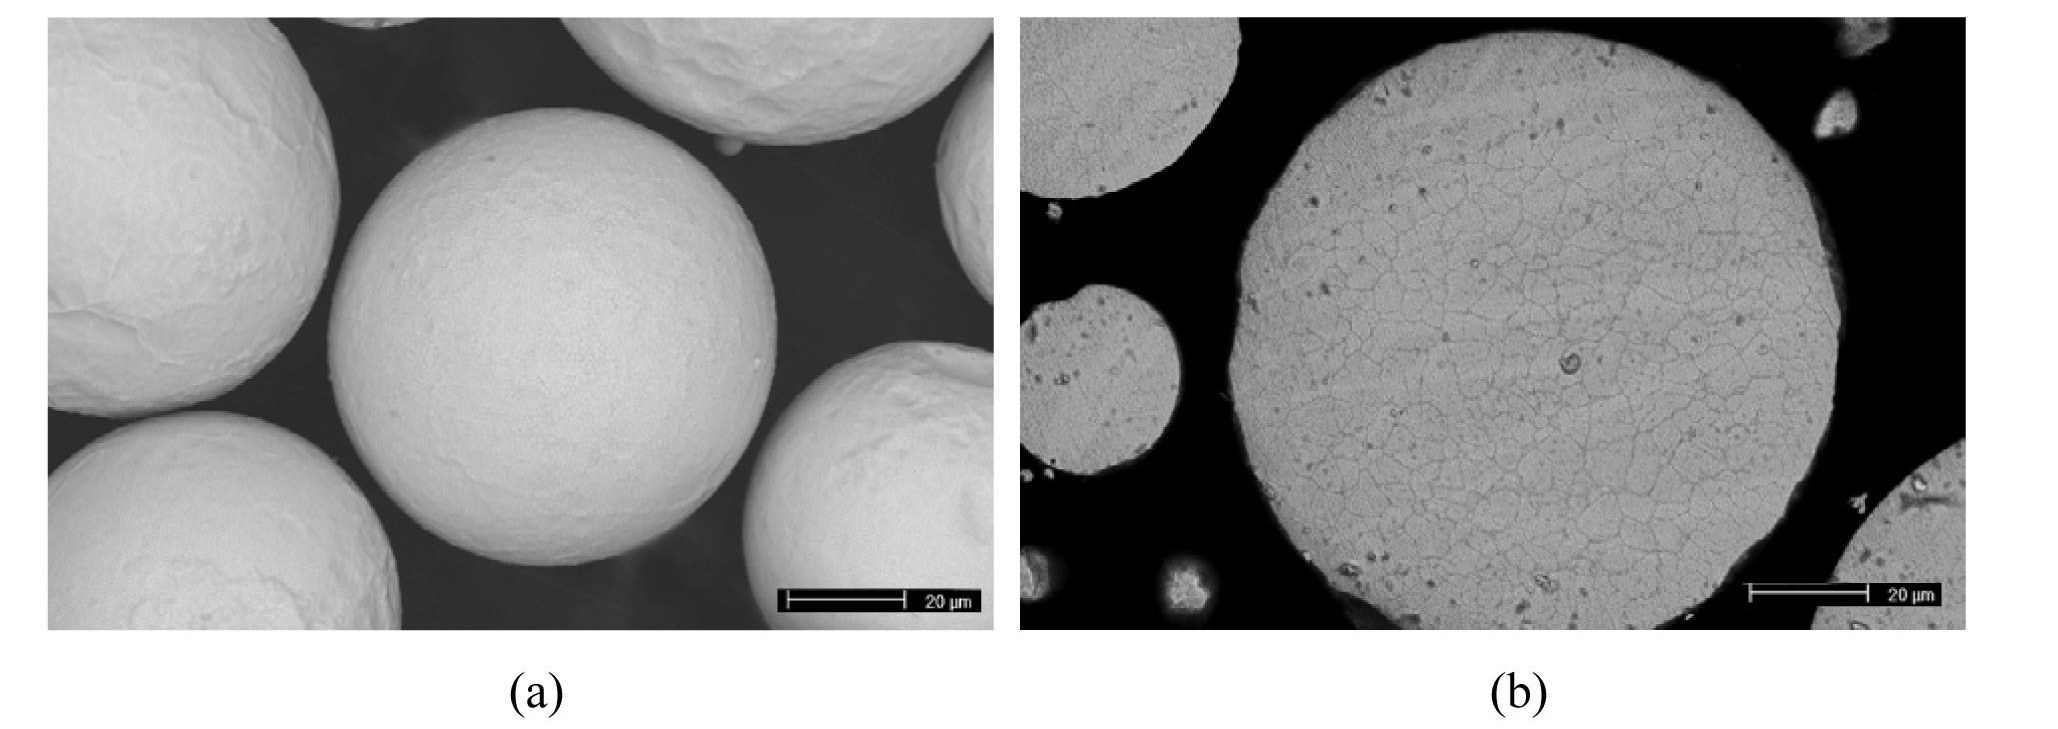 Scanning Electron Micrographs Showing (a) the Spherical Shape Morphology and (b) a Cross-section Micrograph of Atomized U-1wt%Al Particles.